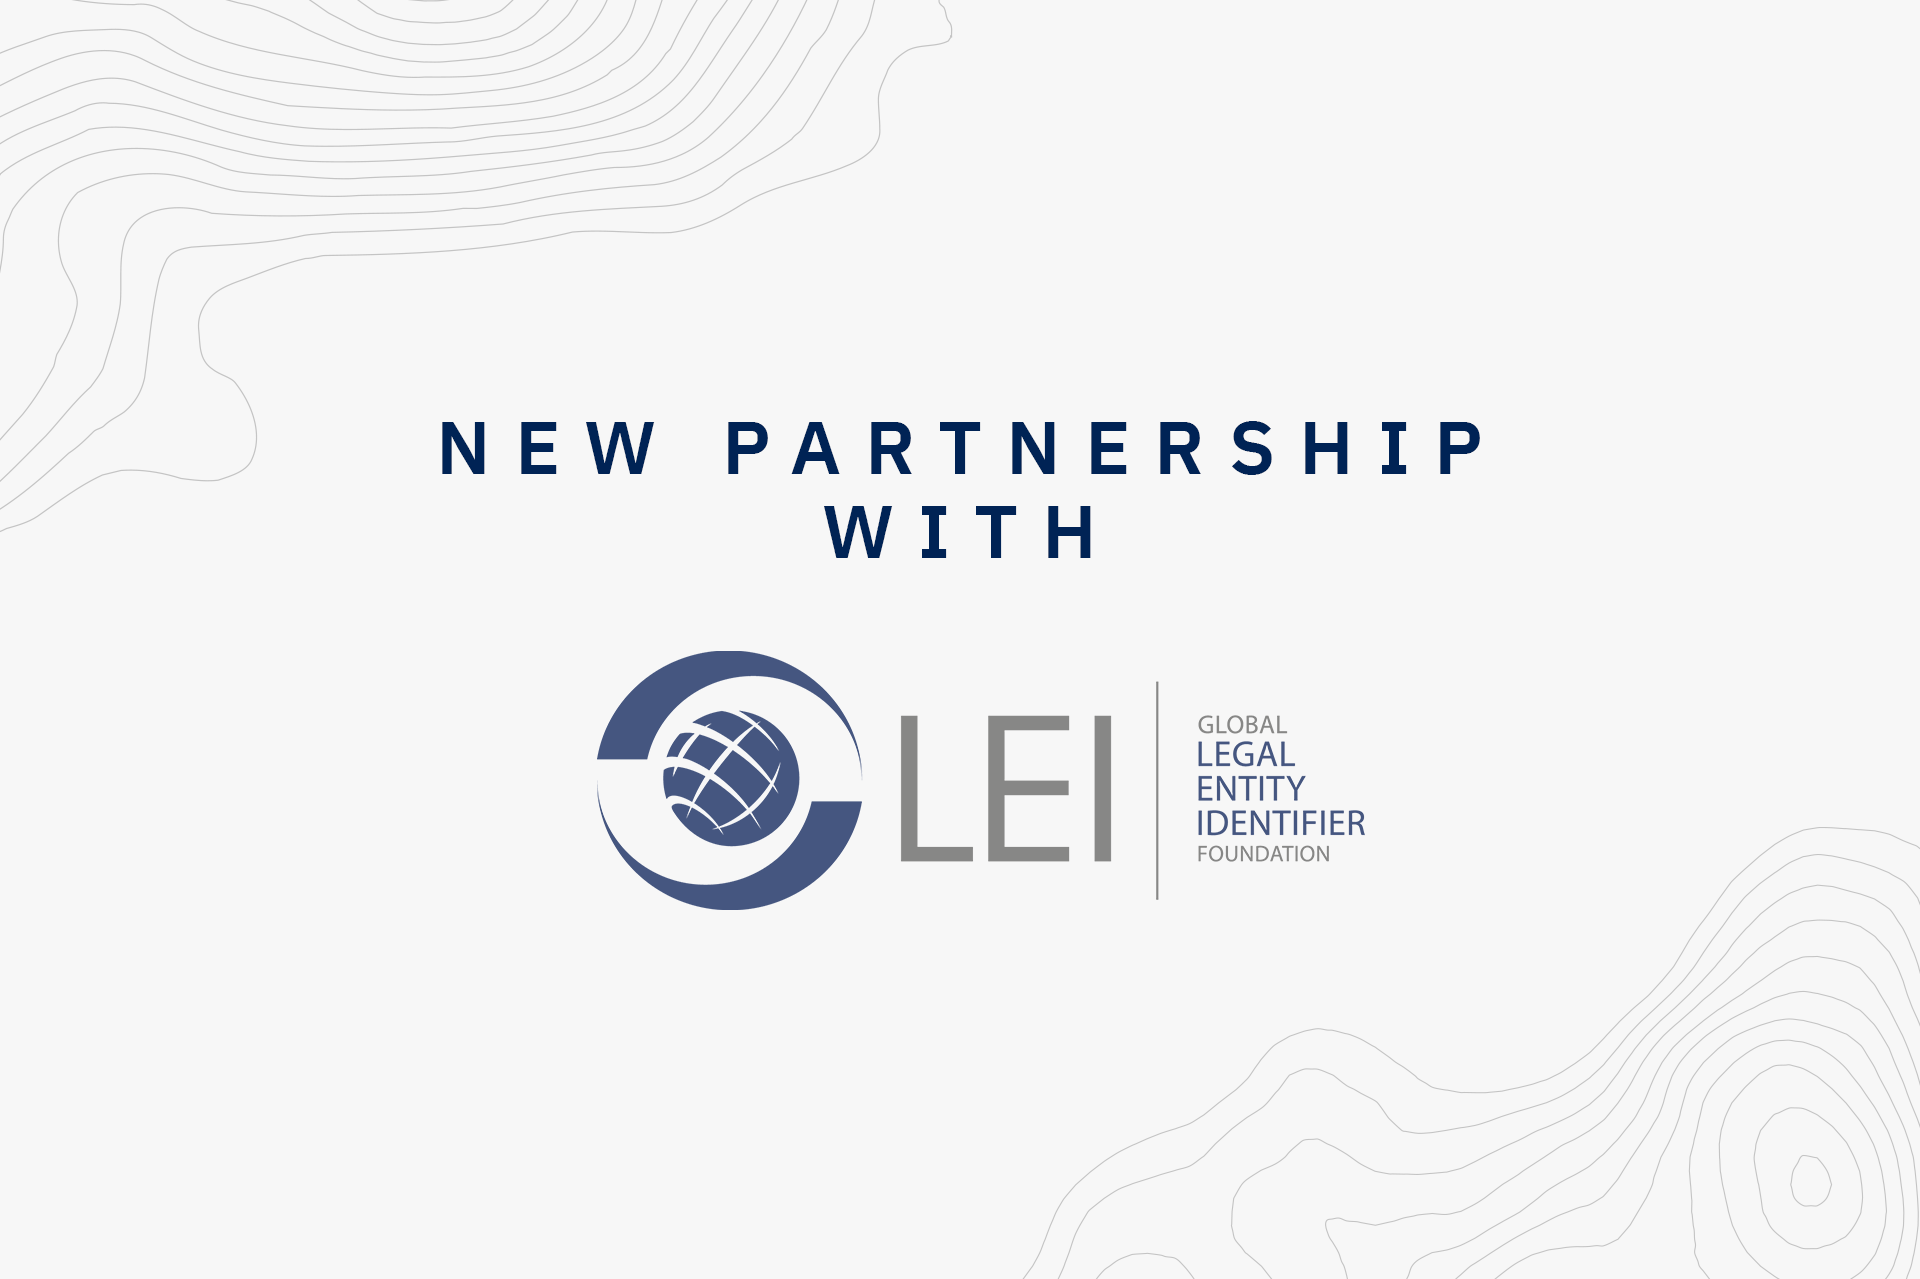 Contour partners with GLEIF to enable LEI usage on digital trade finance network